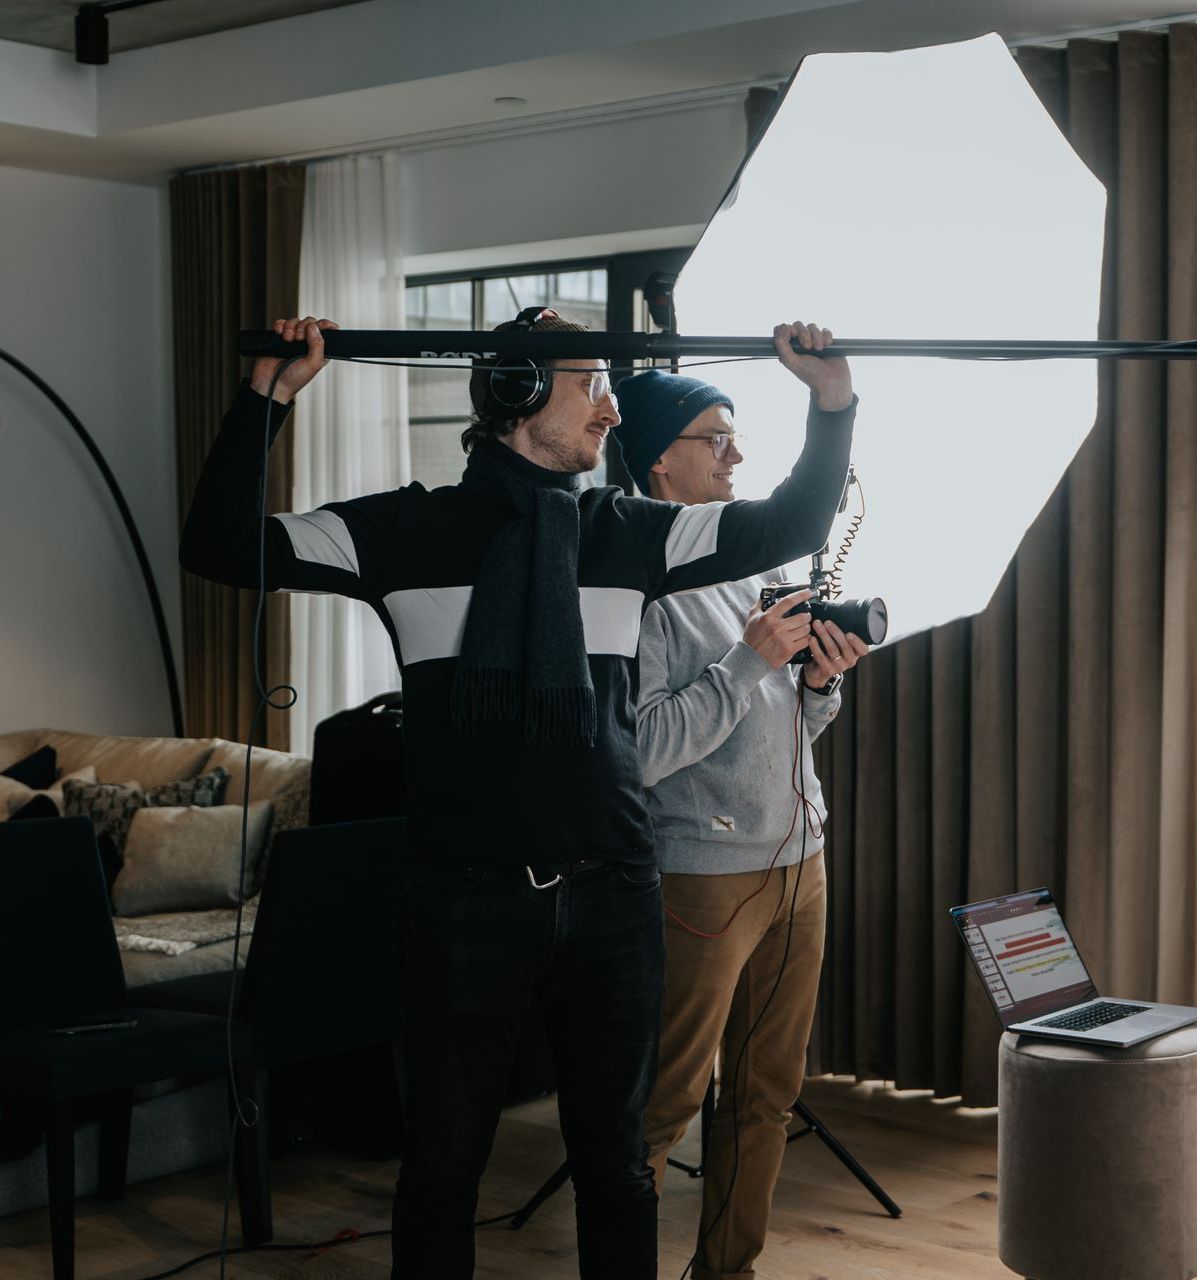 two men are standing in a living room holding umbrellas and cameras .